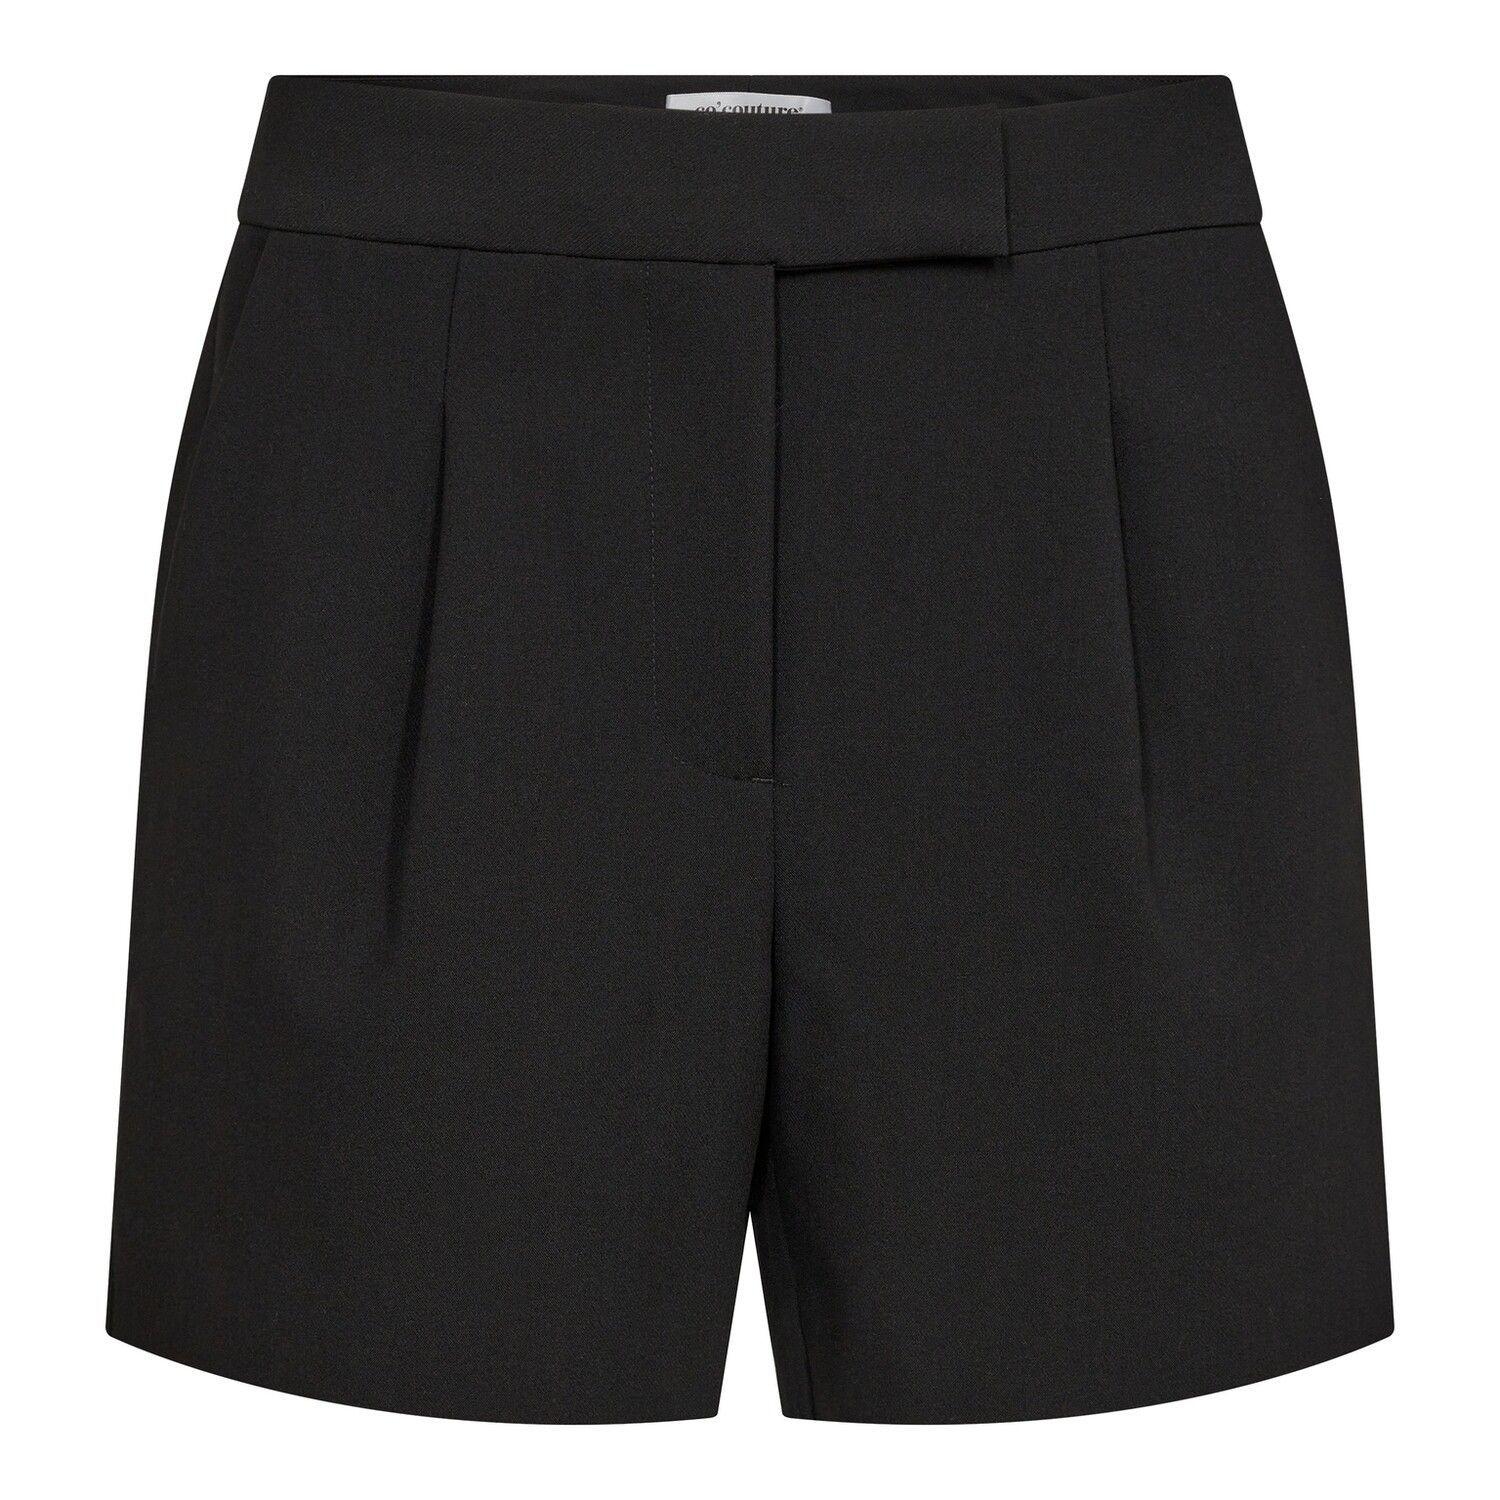 Co'Couture Vola Shorts